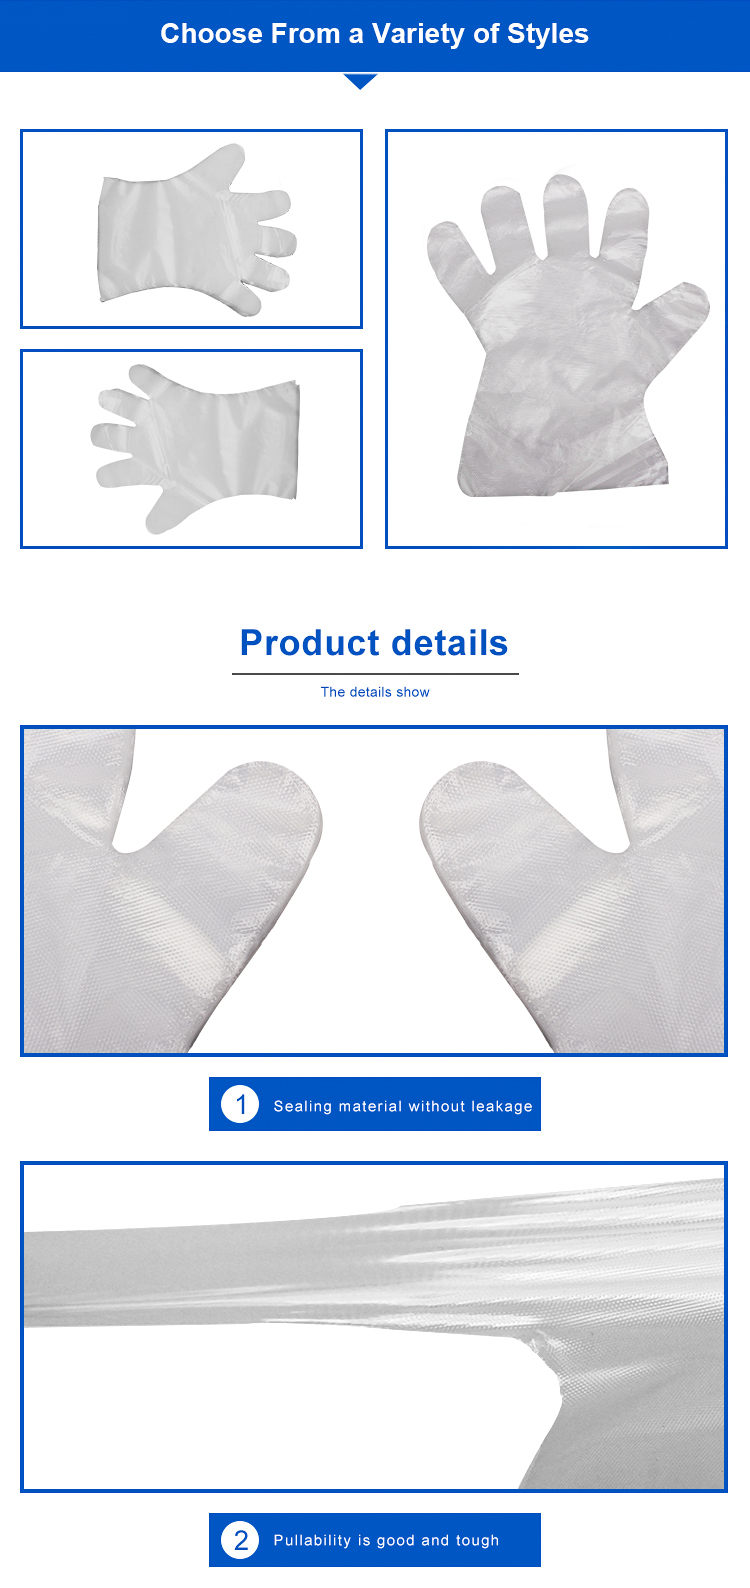 Compostable sanitary clear pe cpe tpe plastic hand gloves for cleaning